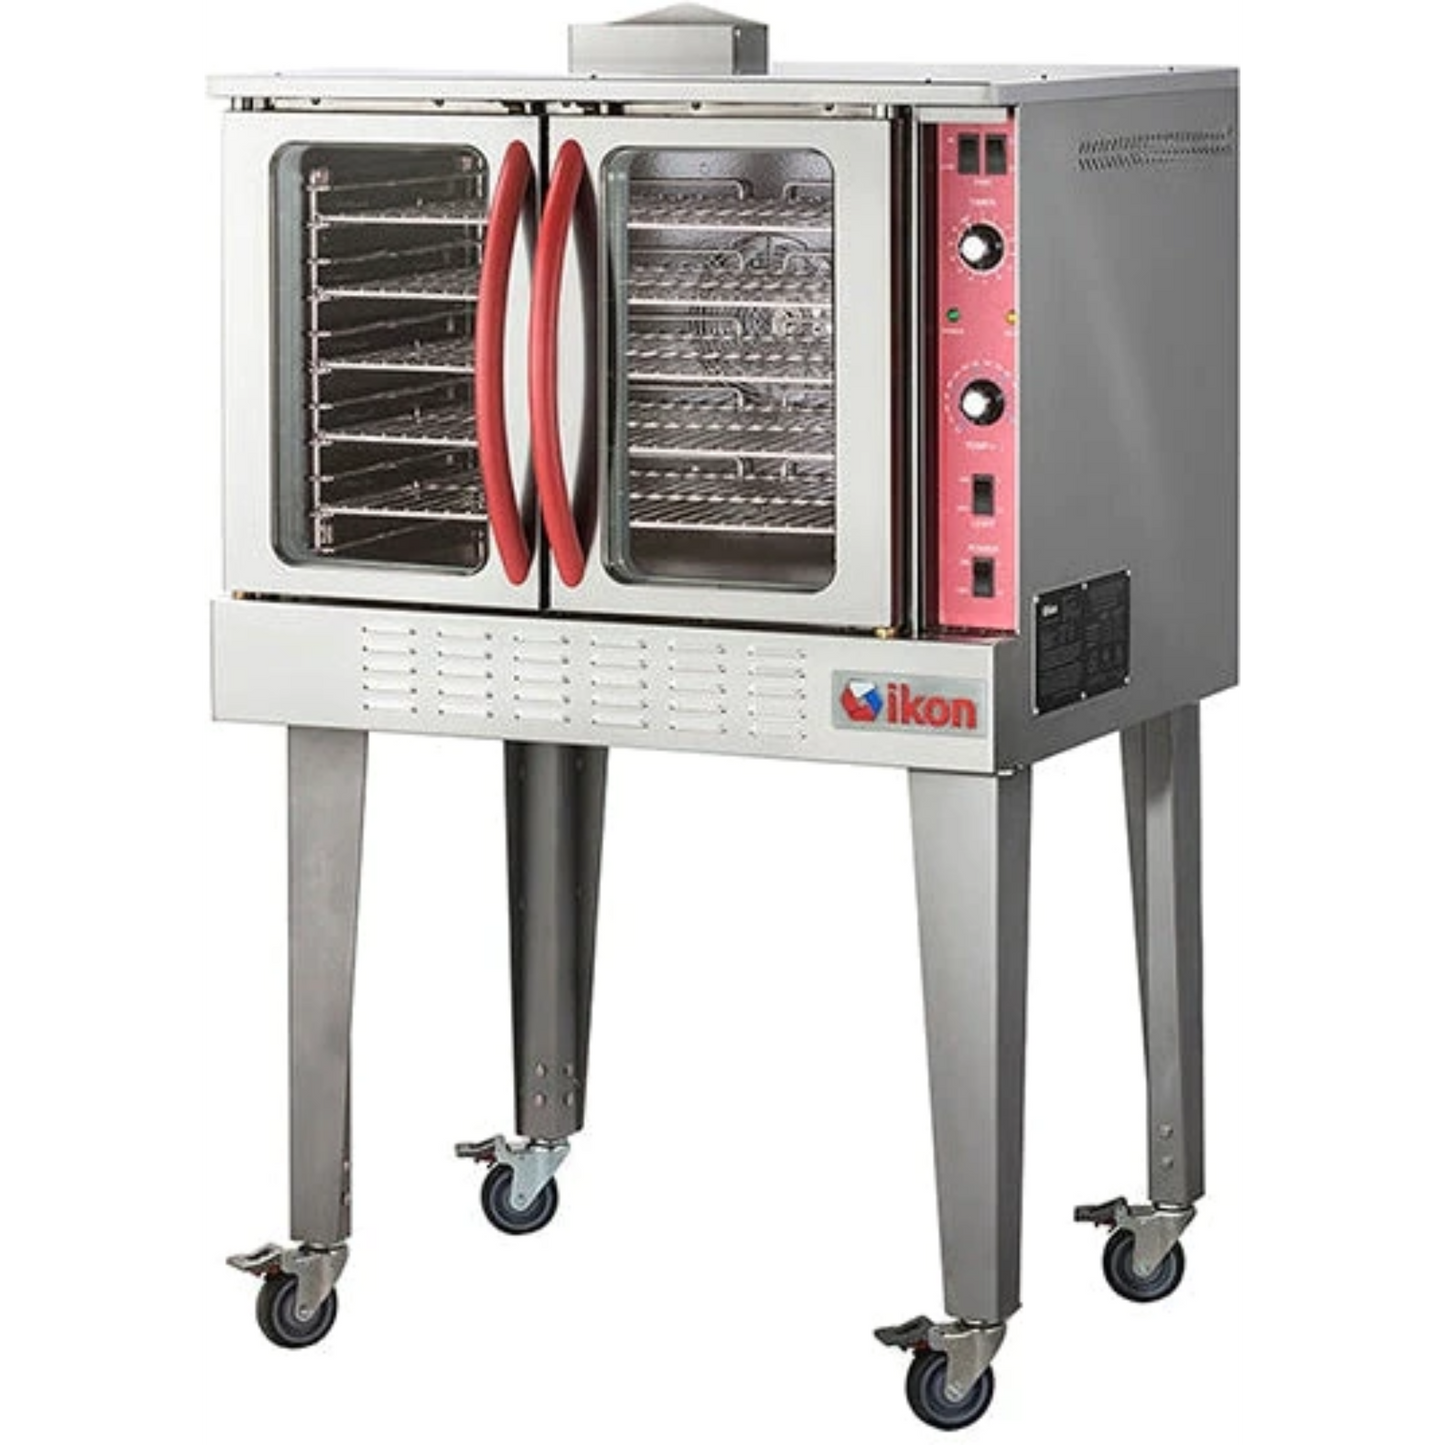 IKON Cooking IECO Electric Convection Oven